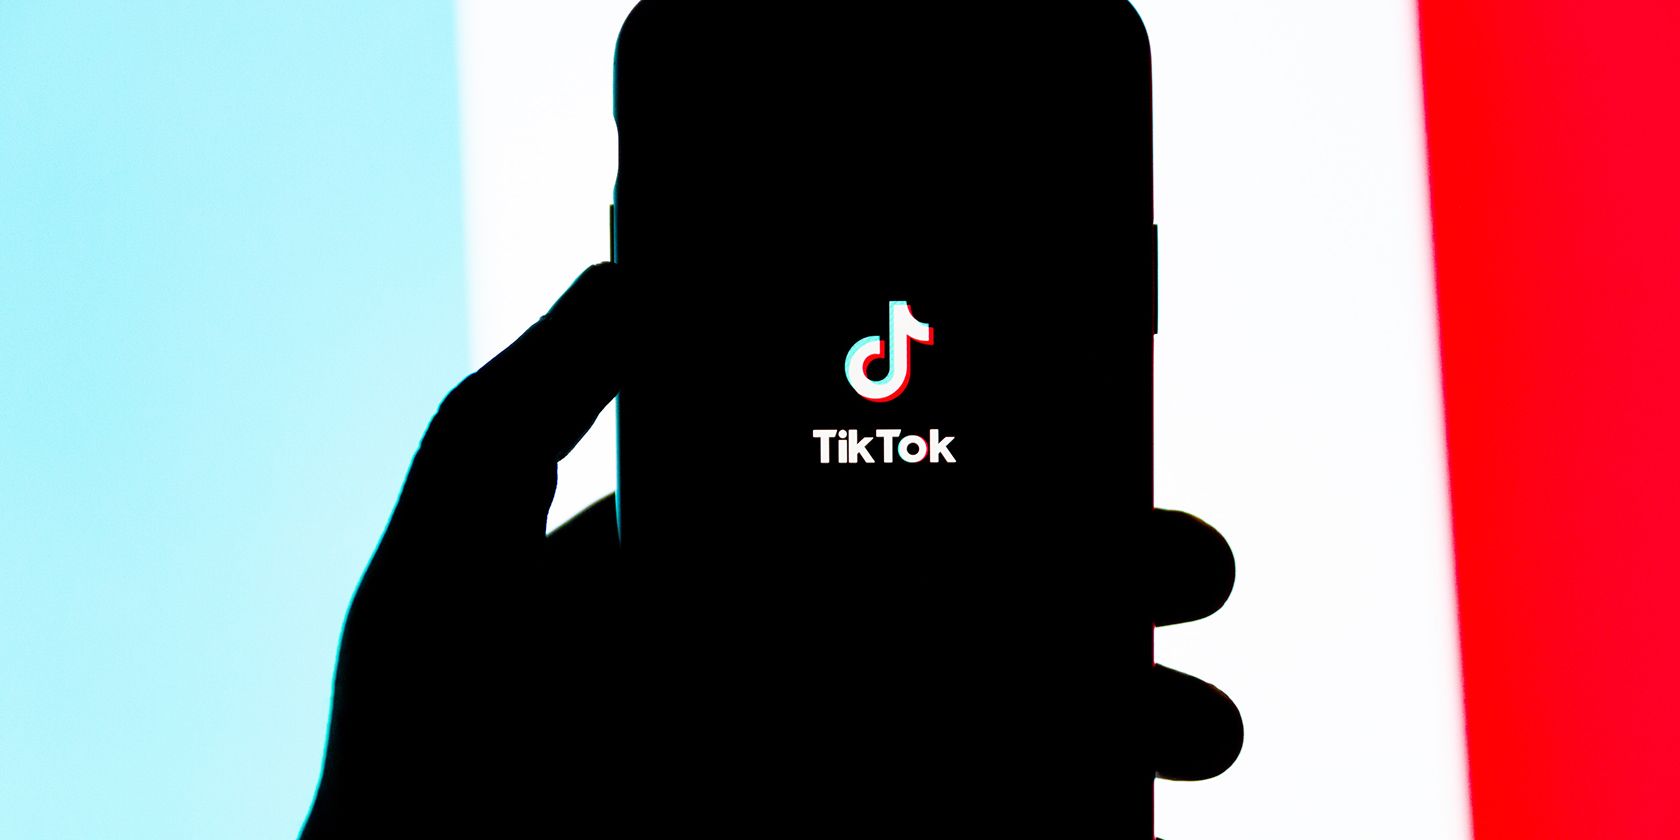 A person holding a phone with the TikTok logo.